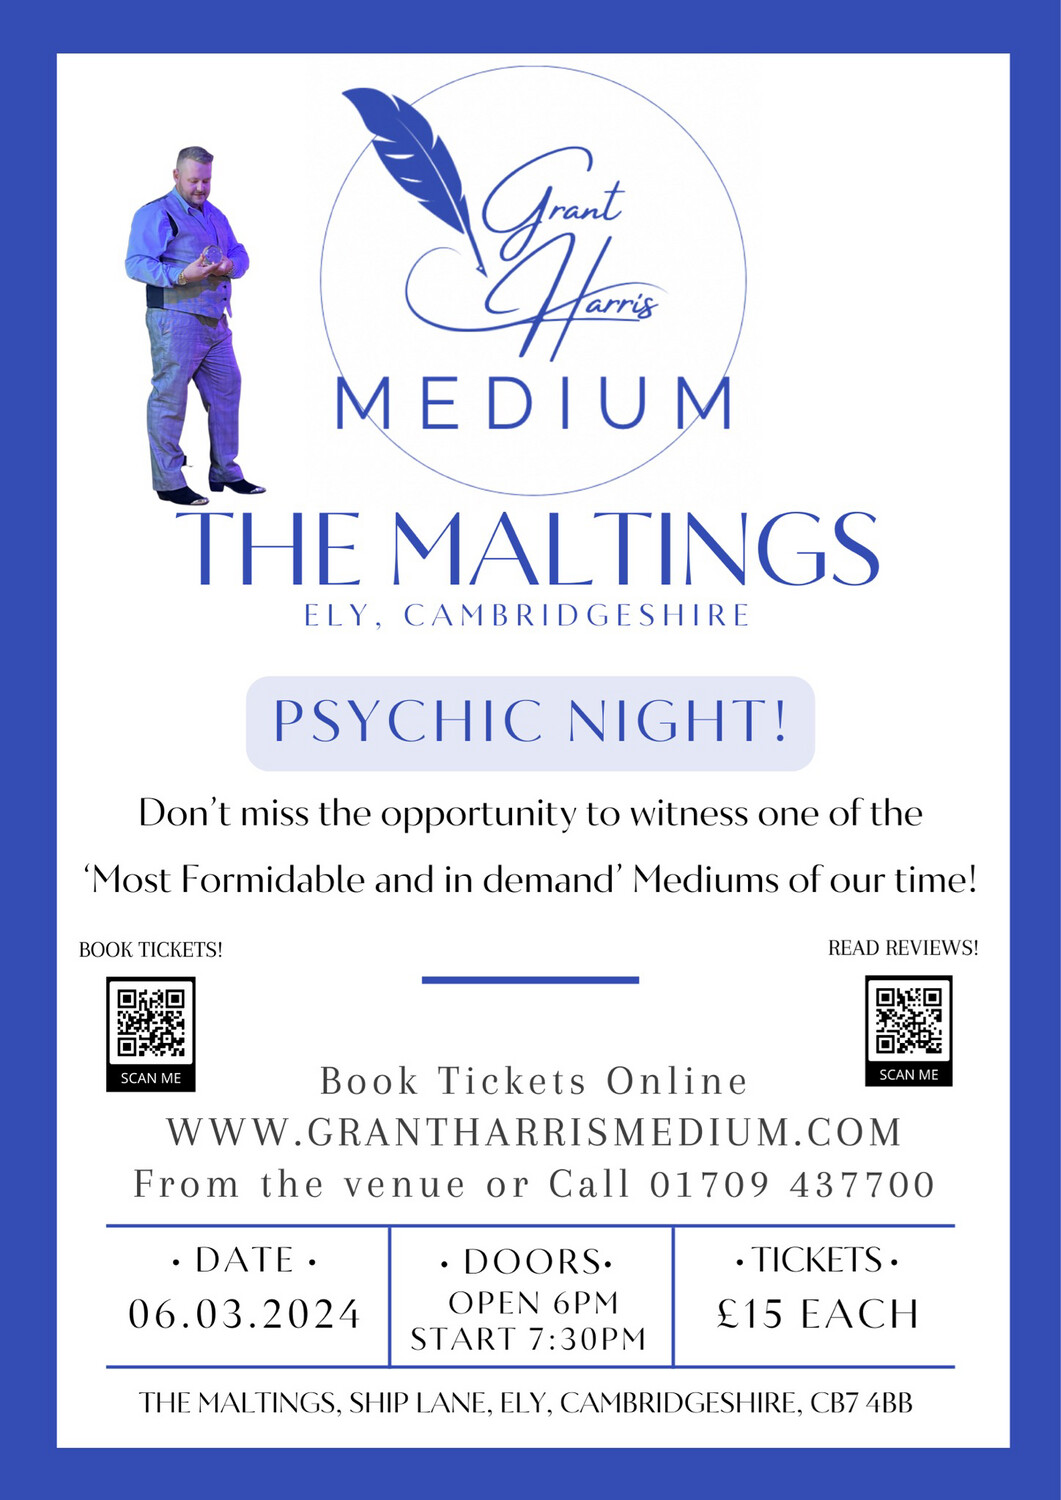 Psychic Night | The Maltings, Ely, Cambridgeshire, Wed 6th March 2024